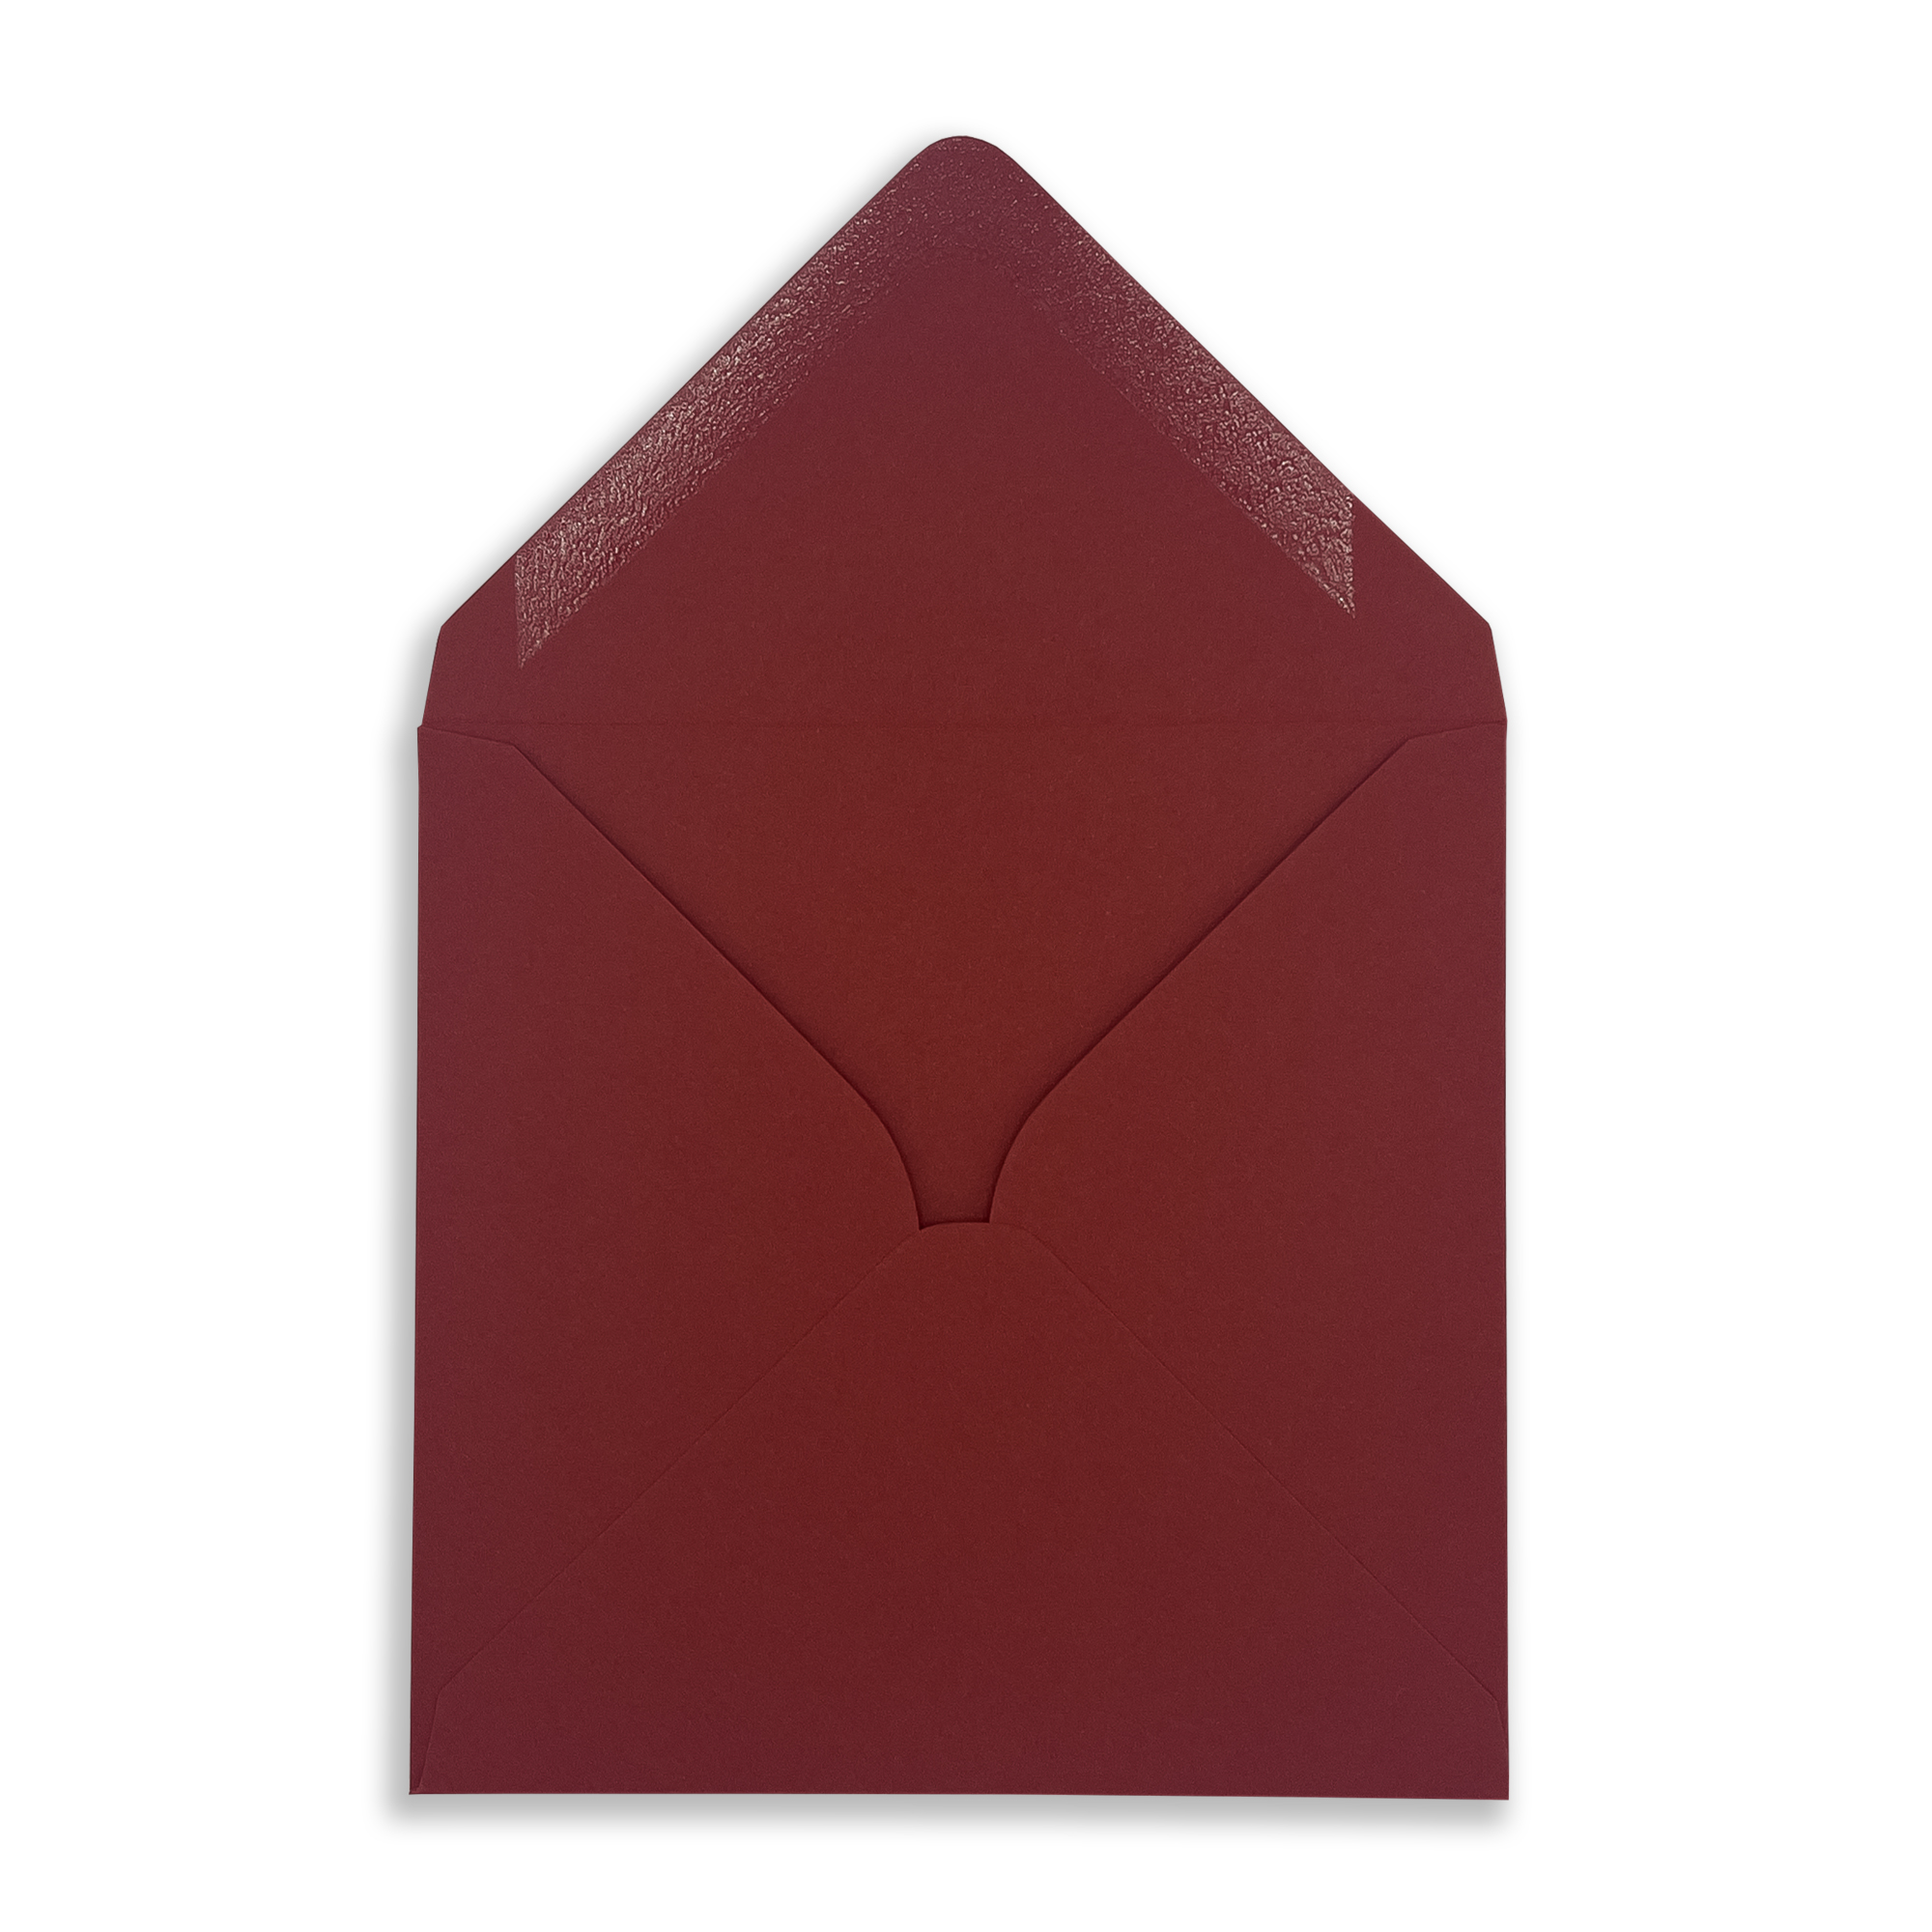 125mmSQ_Christmas_Red_Envelope_OpenFront